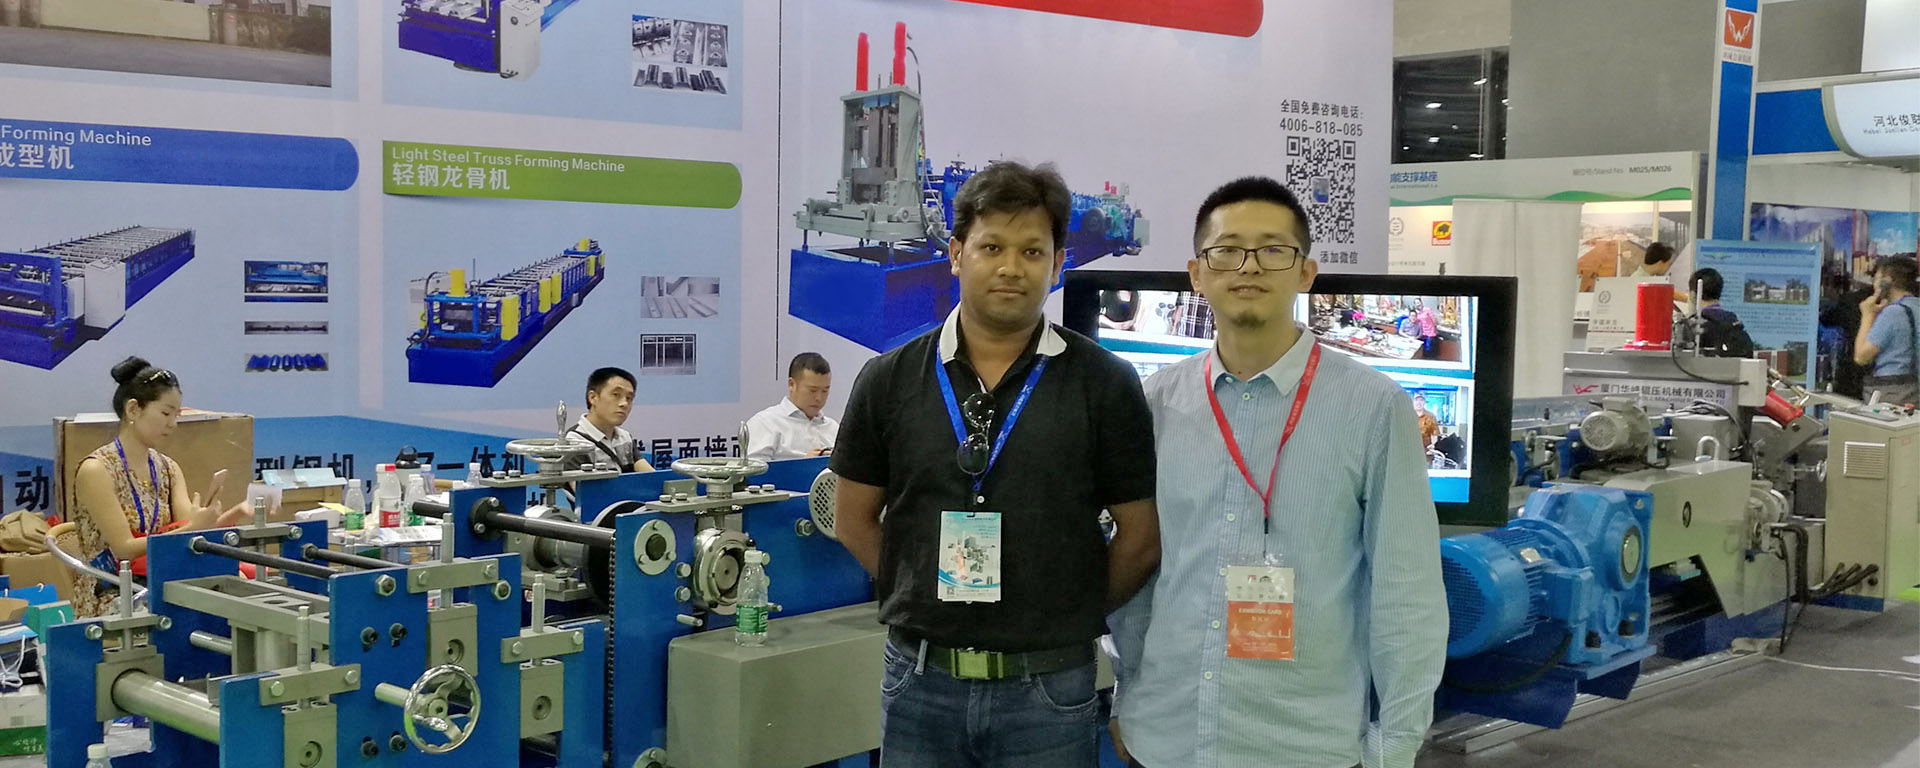 TATA Steel Engineer visit Roll Forming Machinery booth